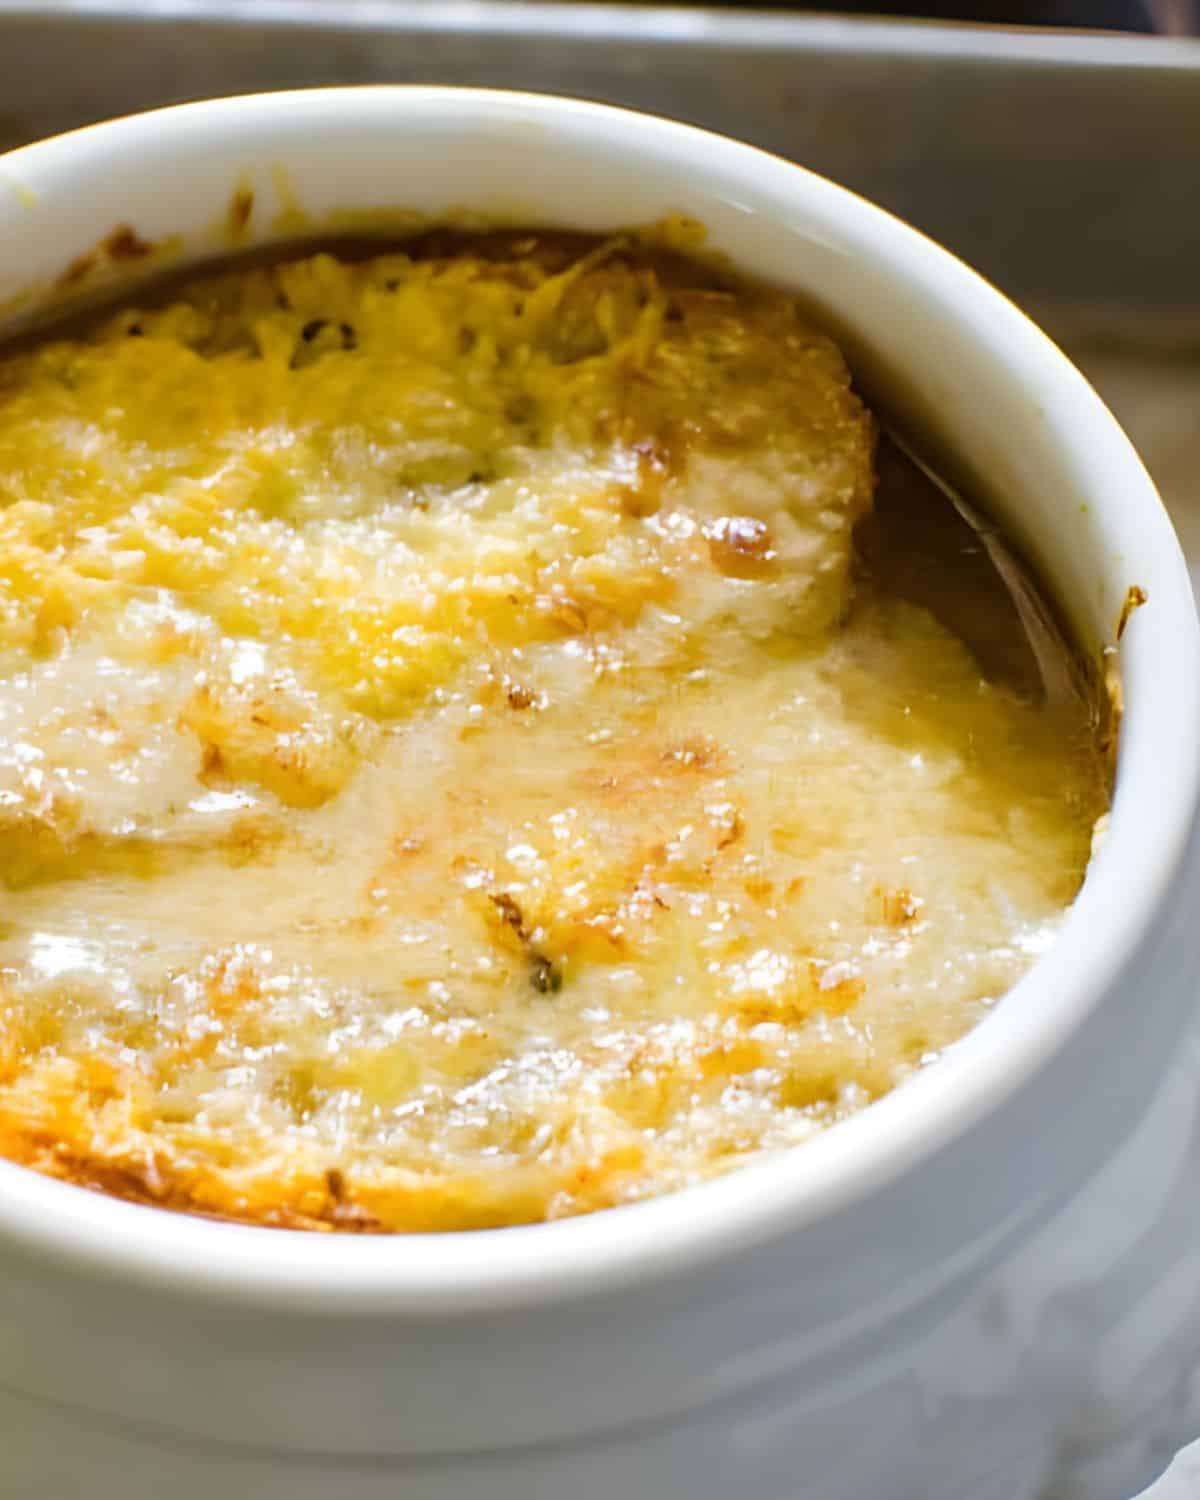 A bowl of French onion soup.